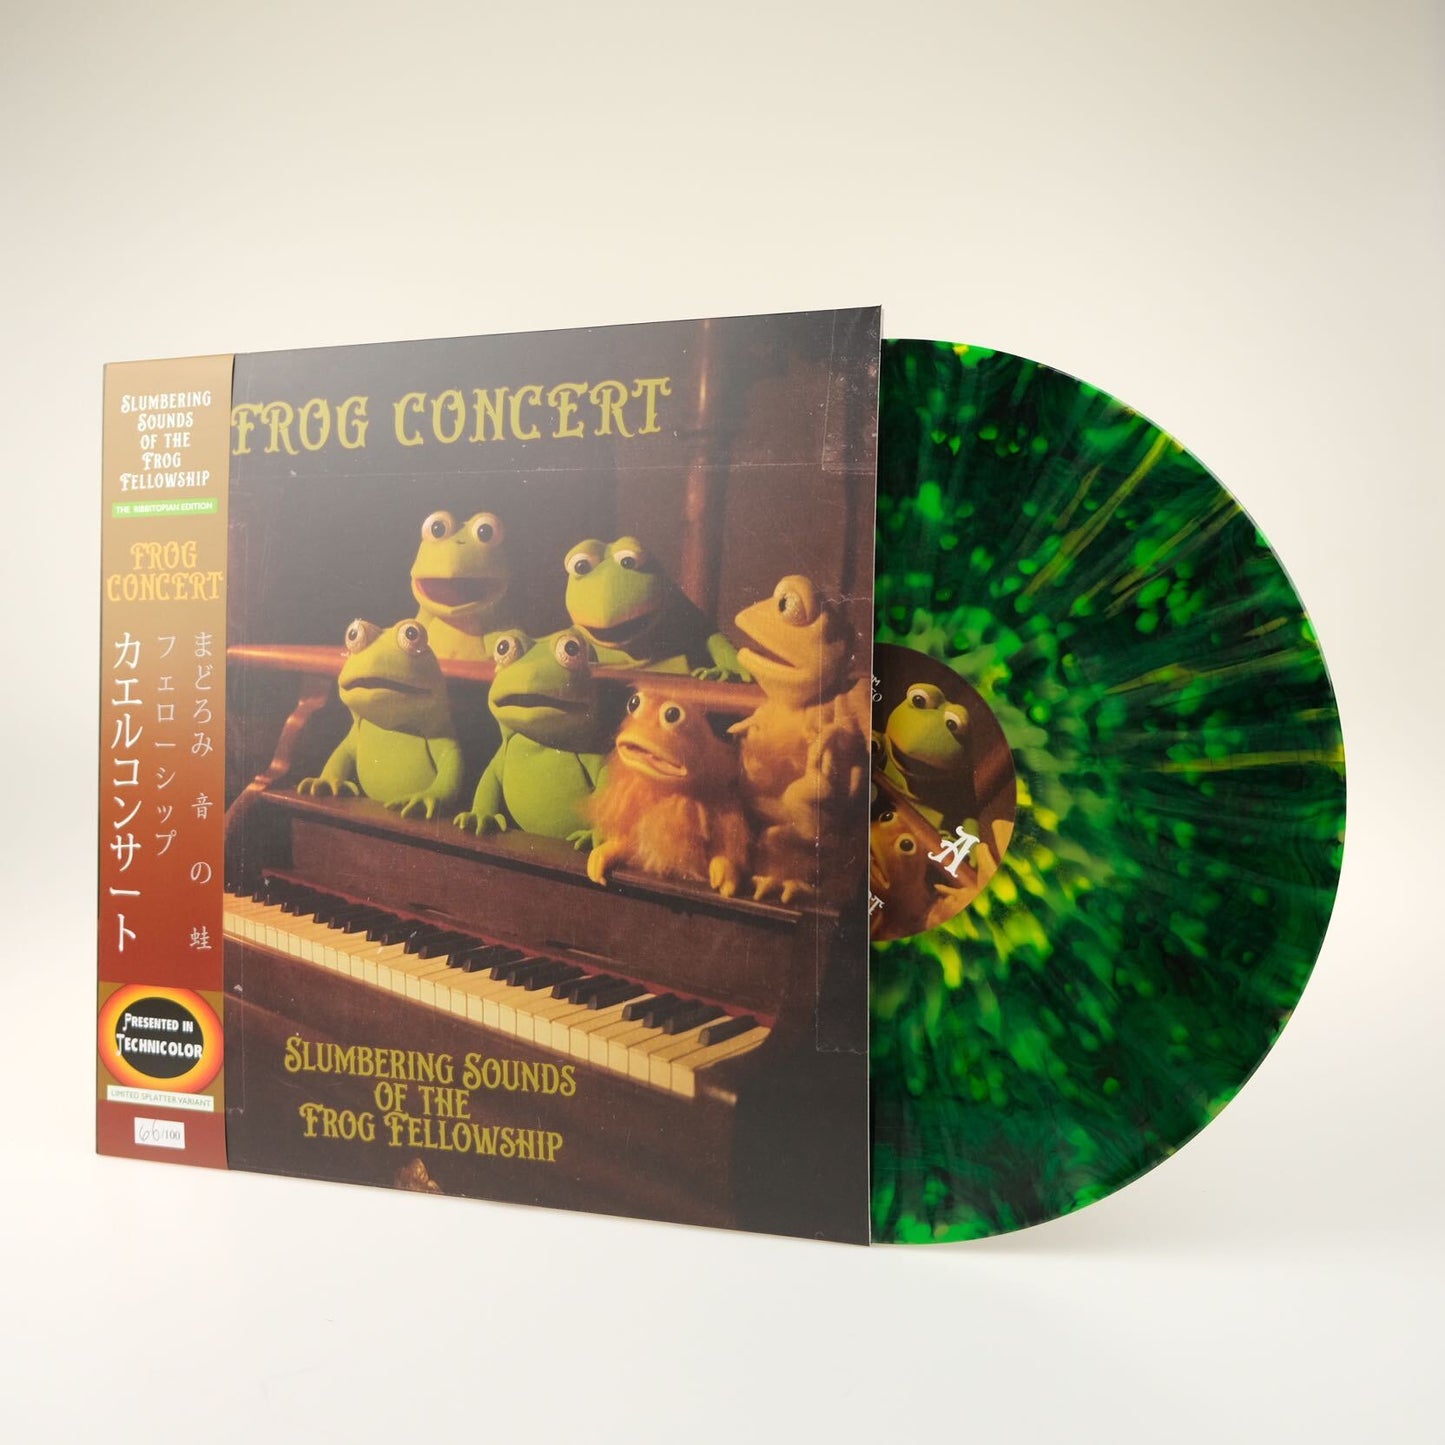 [SOLD OUT] FROG CONCERT "Slumbering Sounds of the Frog Fellowship" vinyl LP (2 color options, 180g)